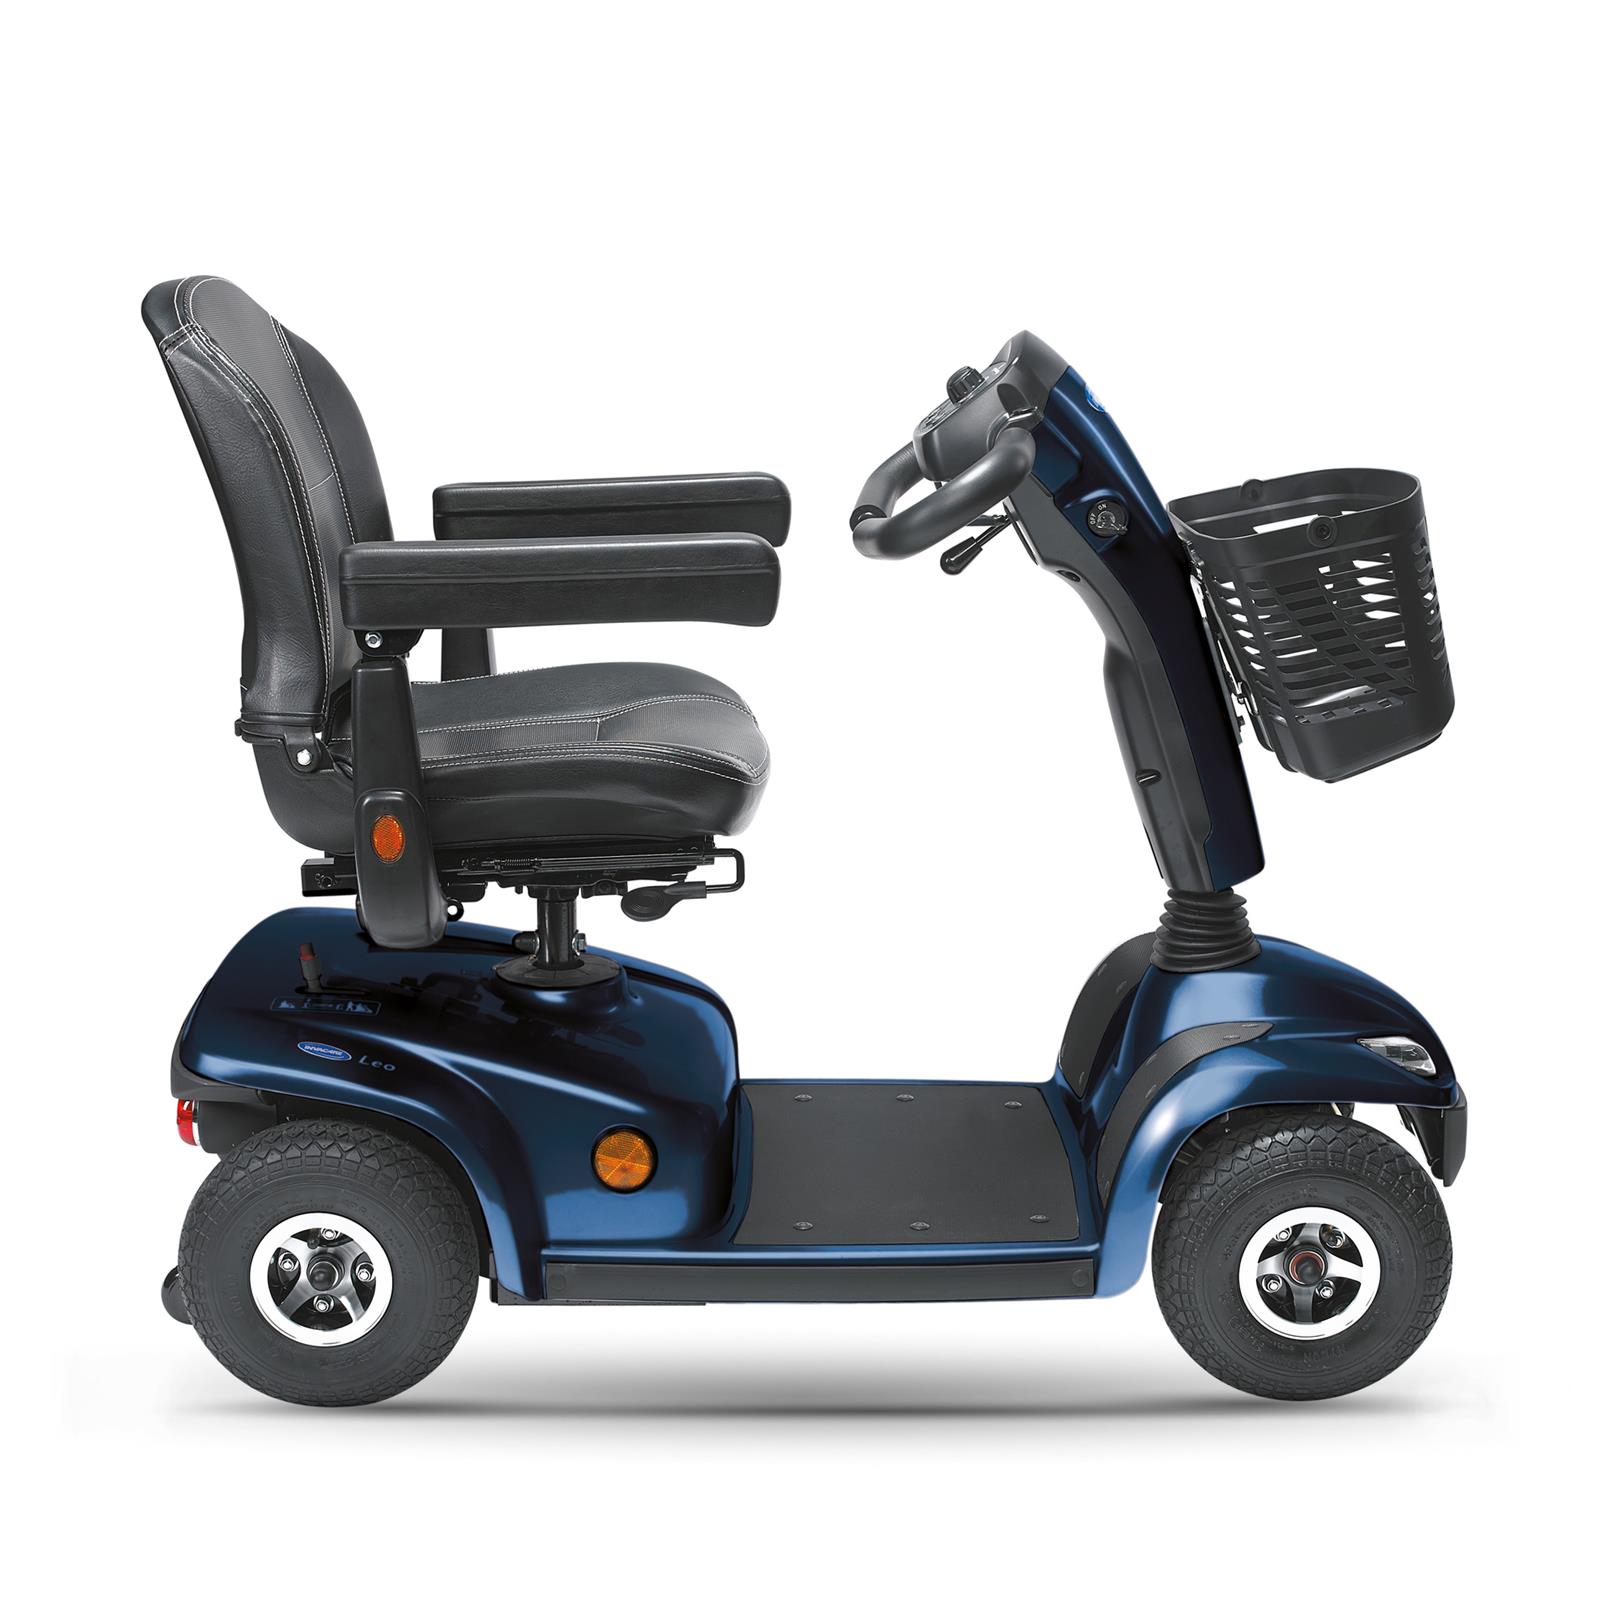 Rent Mobility scooter - Leo in Pollensa, Alcudia